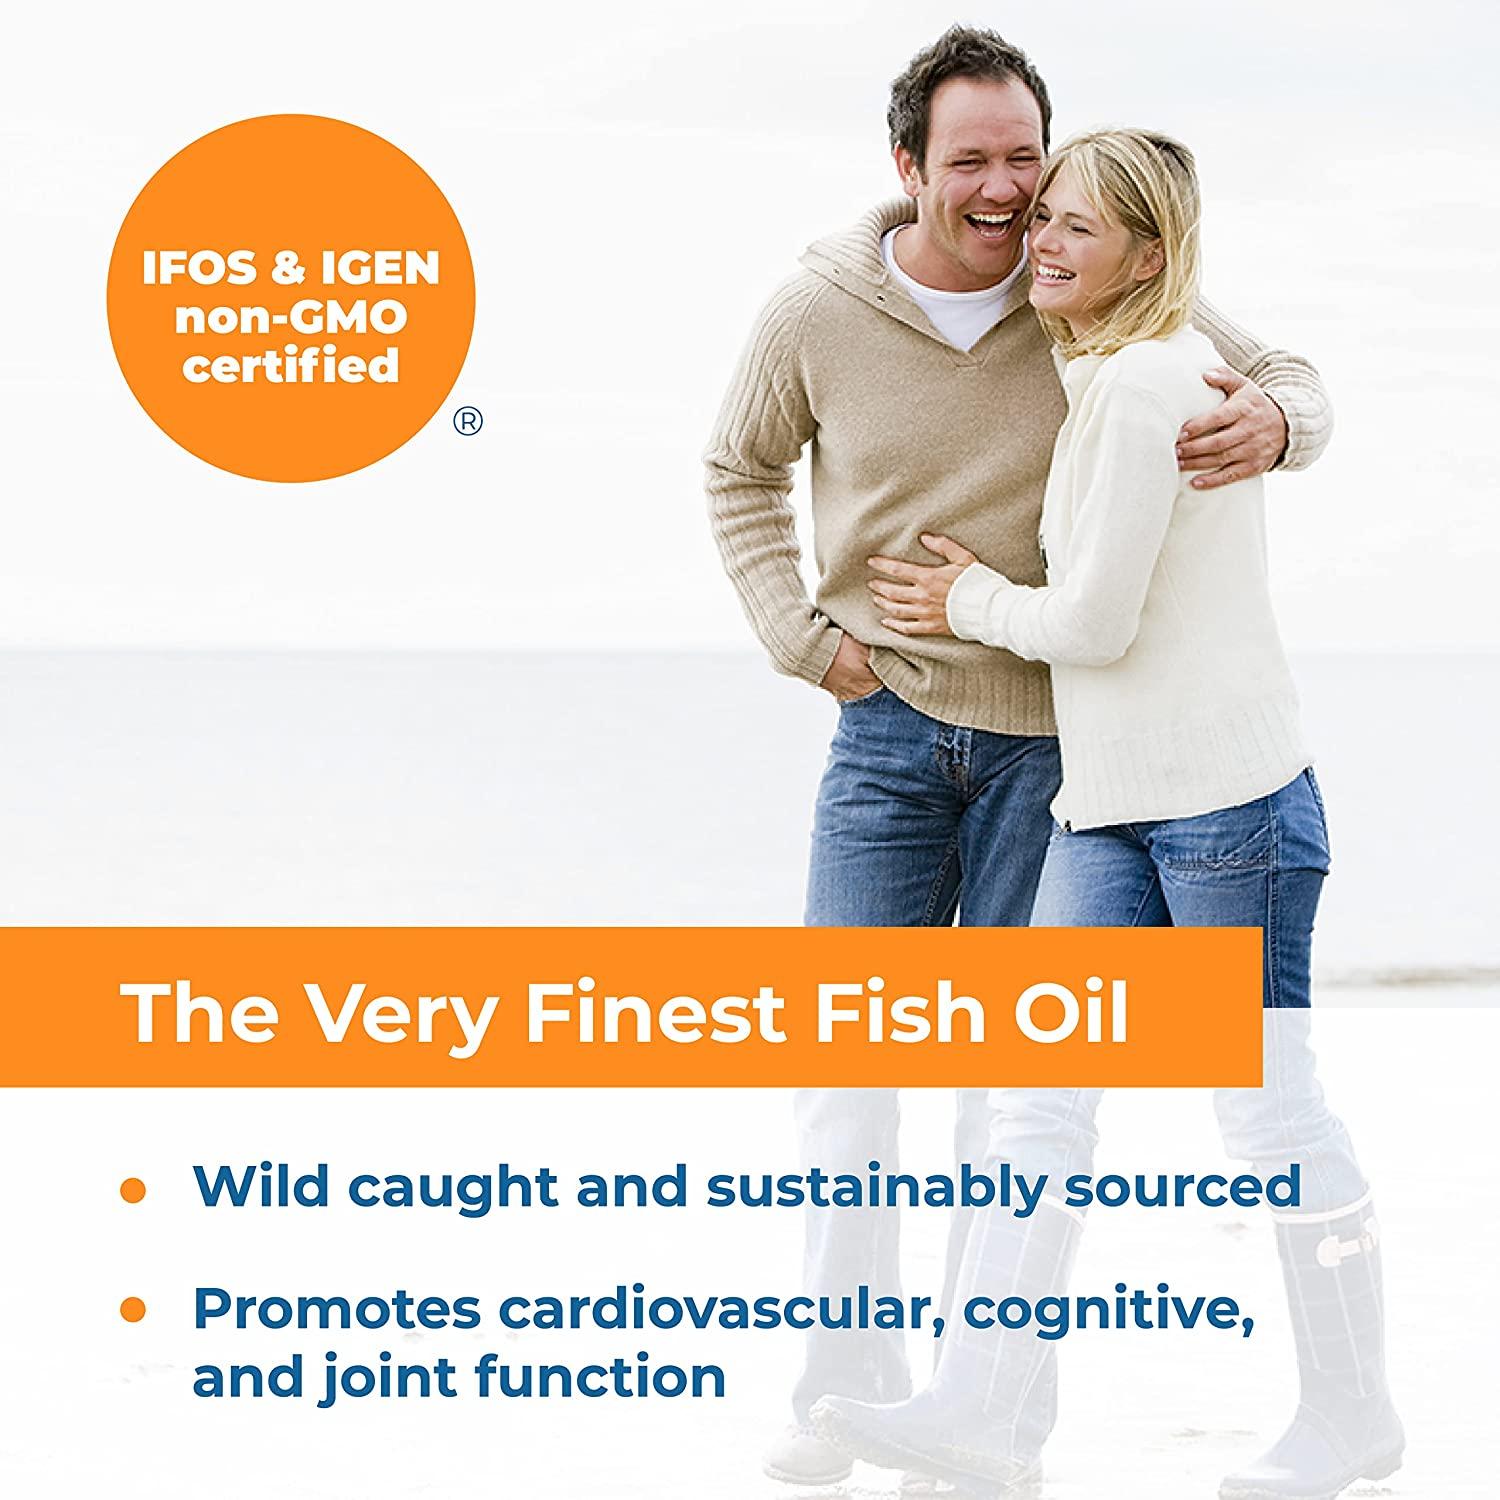 Carlson The Very Finest Fish Oil: Promotes Cardiovascular & Joint Function